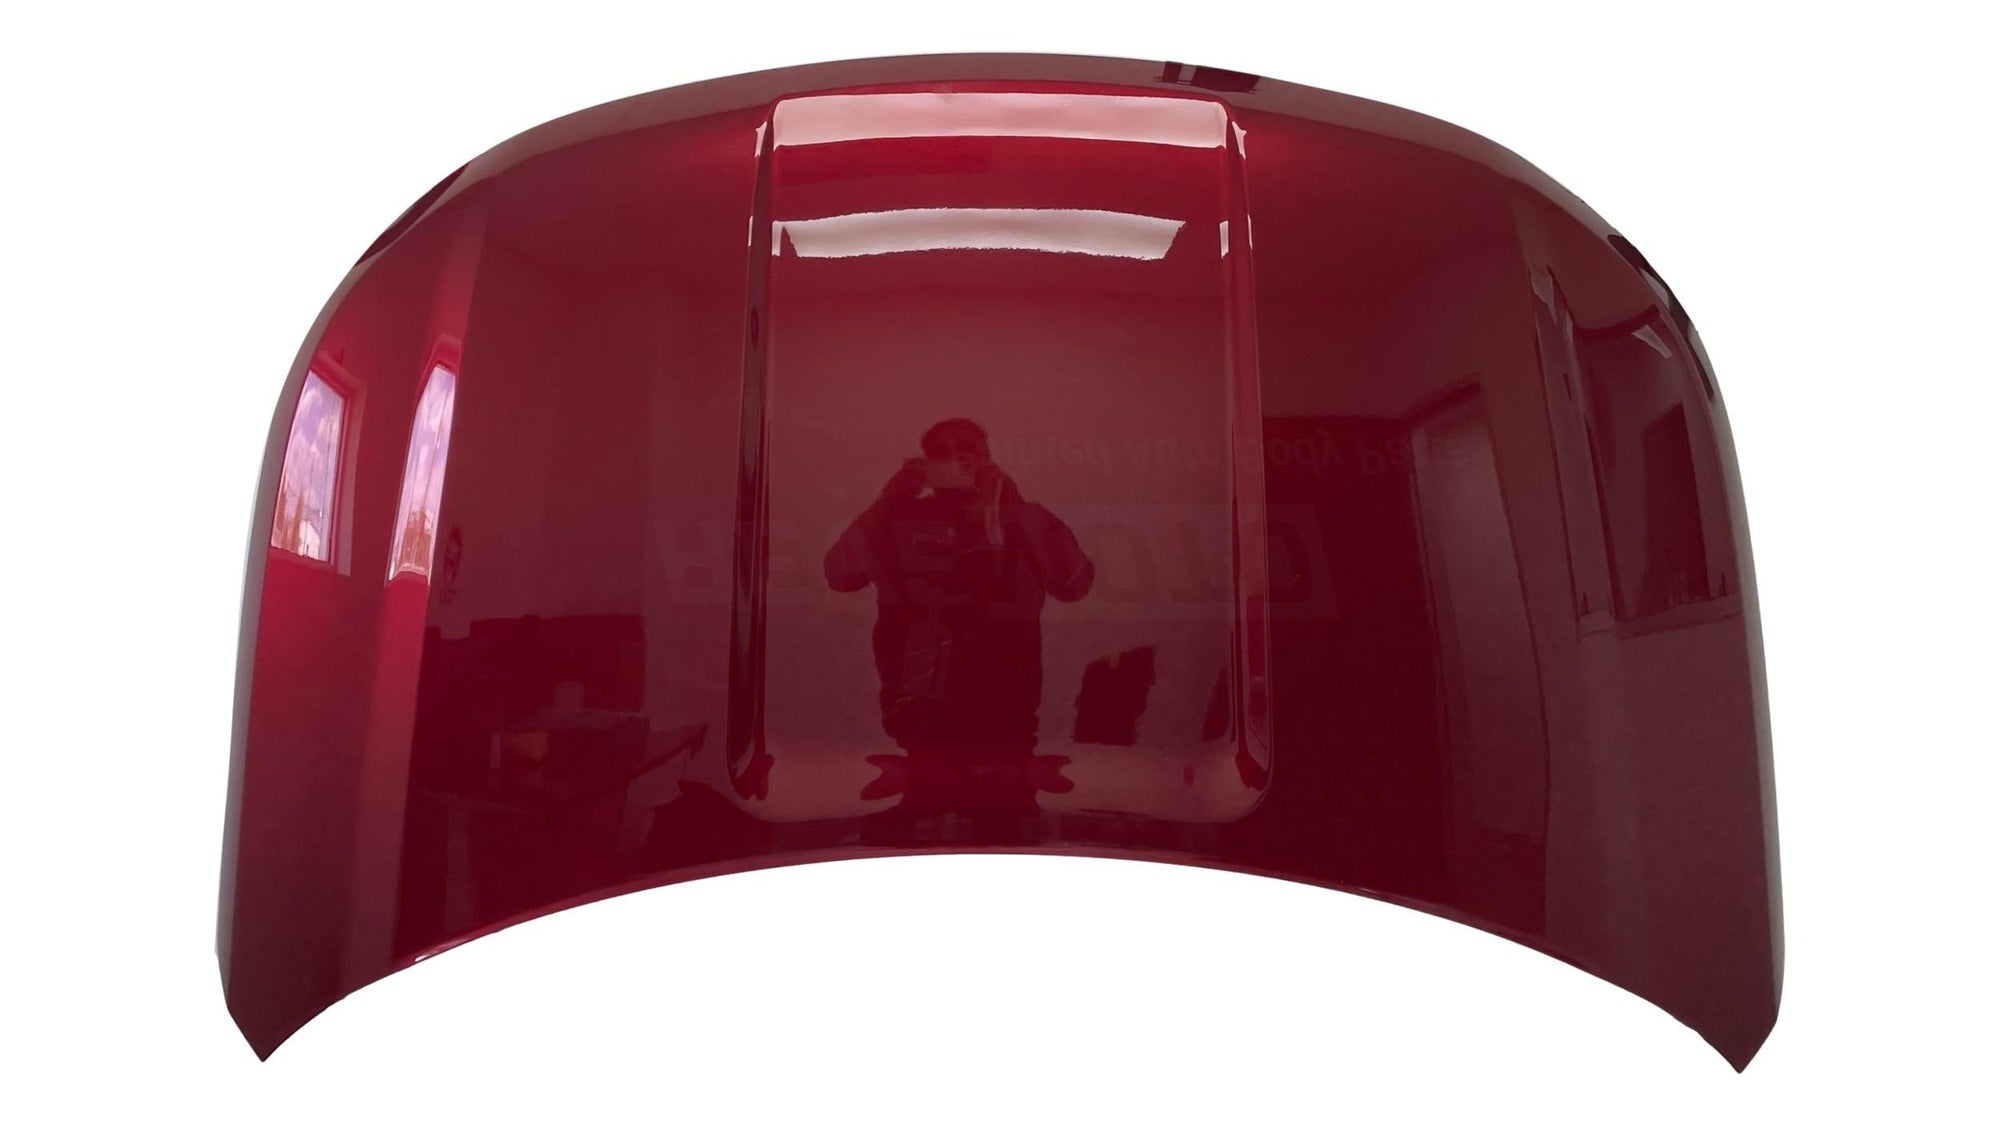 25491 - 2016-2019 Ford Police Interceptor Utility Hood Painted Ruby Red Metallic (RR) Aluminum FB5Z16612A FO1230315